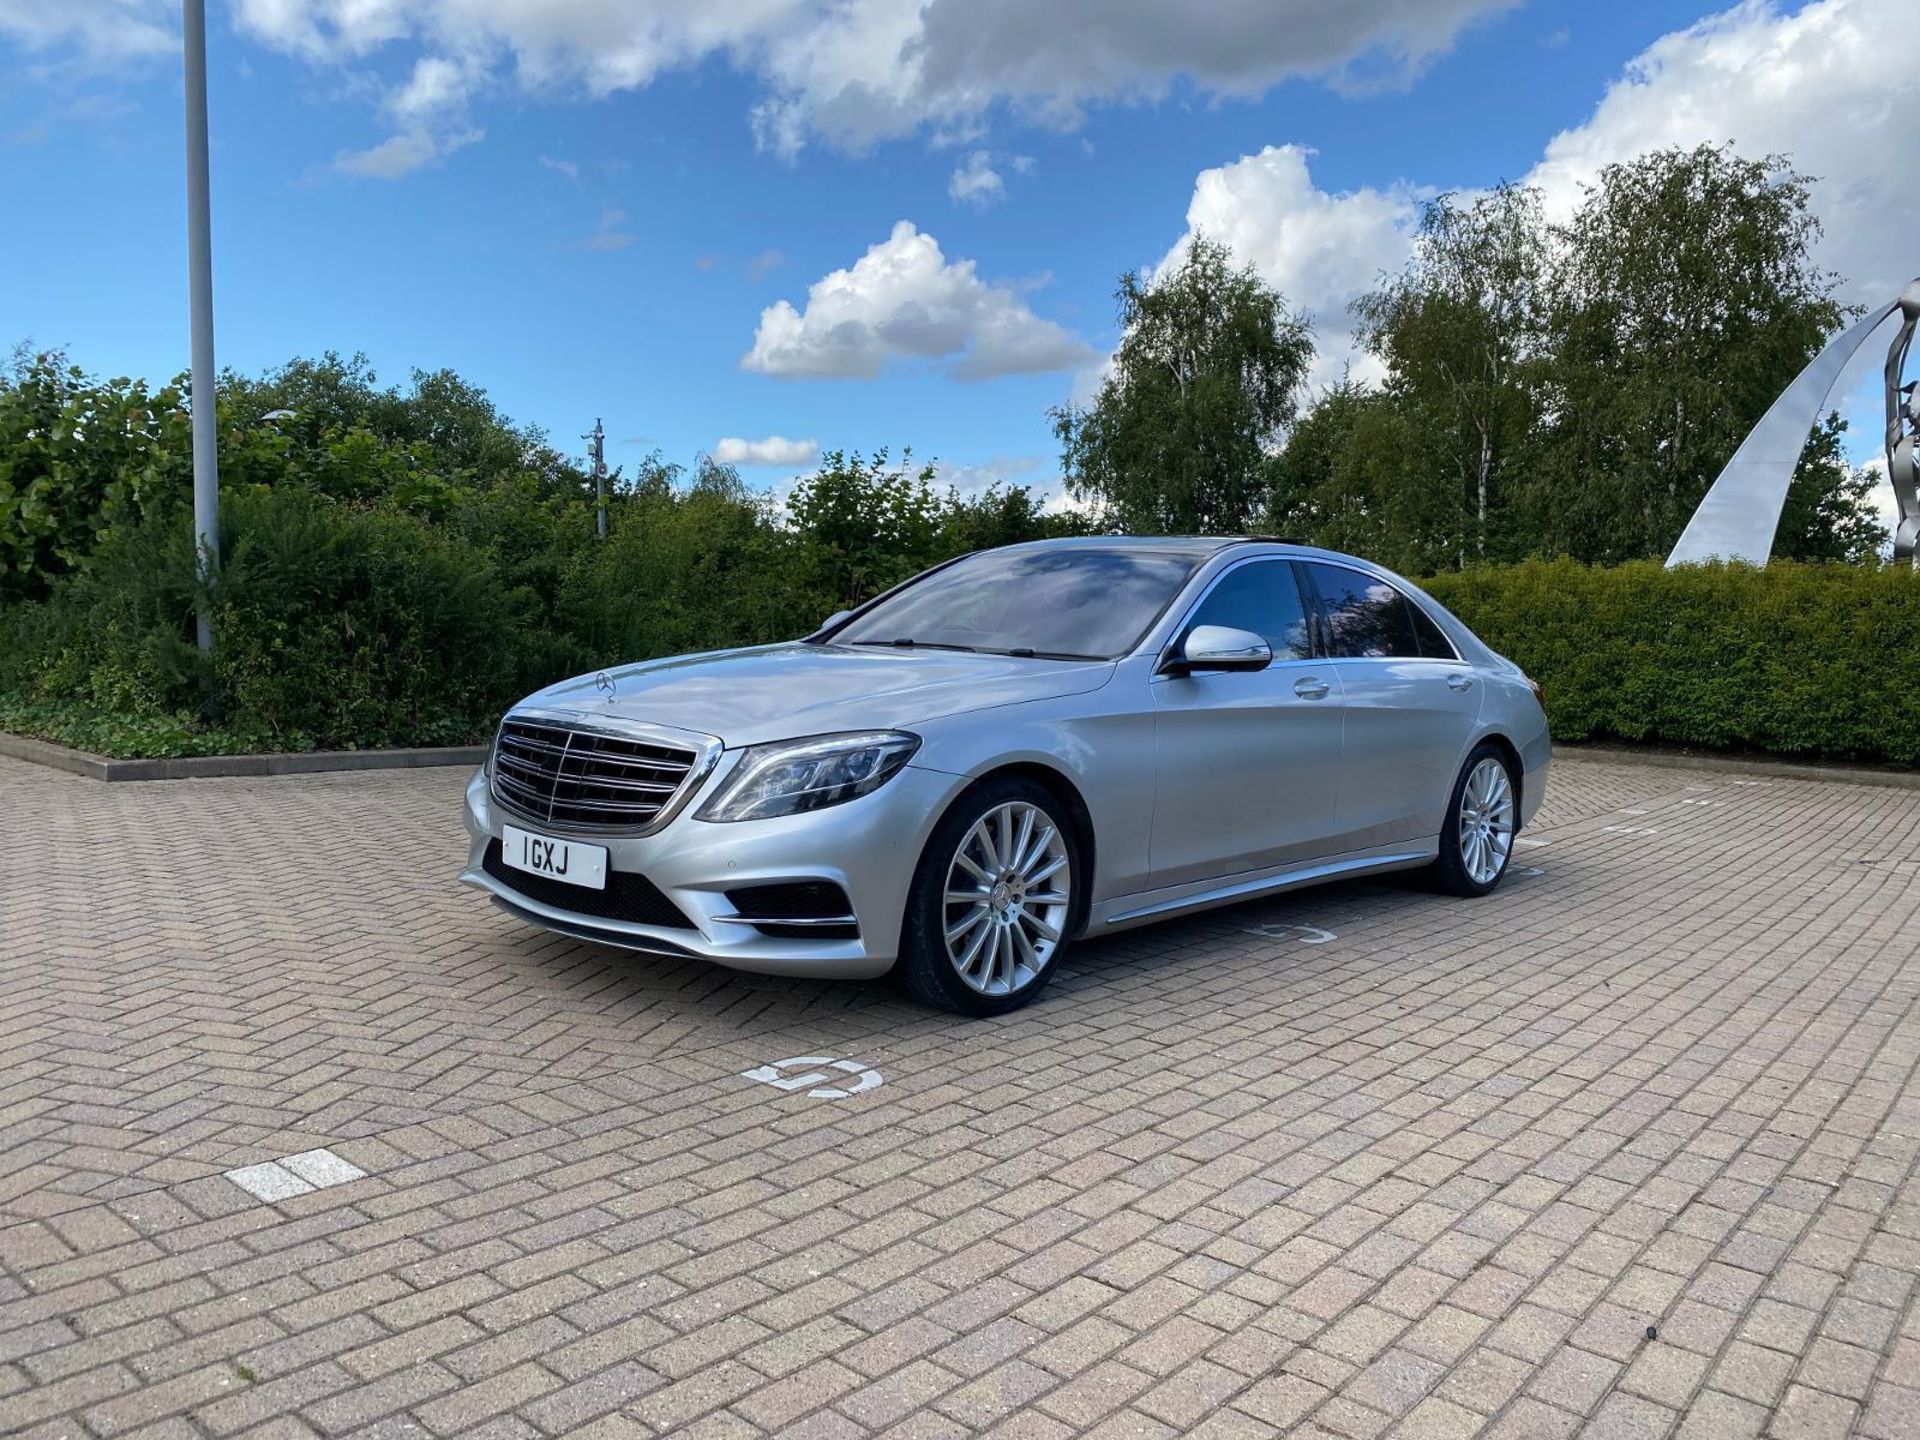 MERCEDES SCLASS S600 6.0 EXCLUSIVE ( 530BHP ) 7G-TRONIC PLUS L AMG LINE - Image 2 of 13